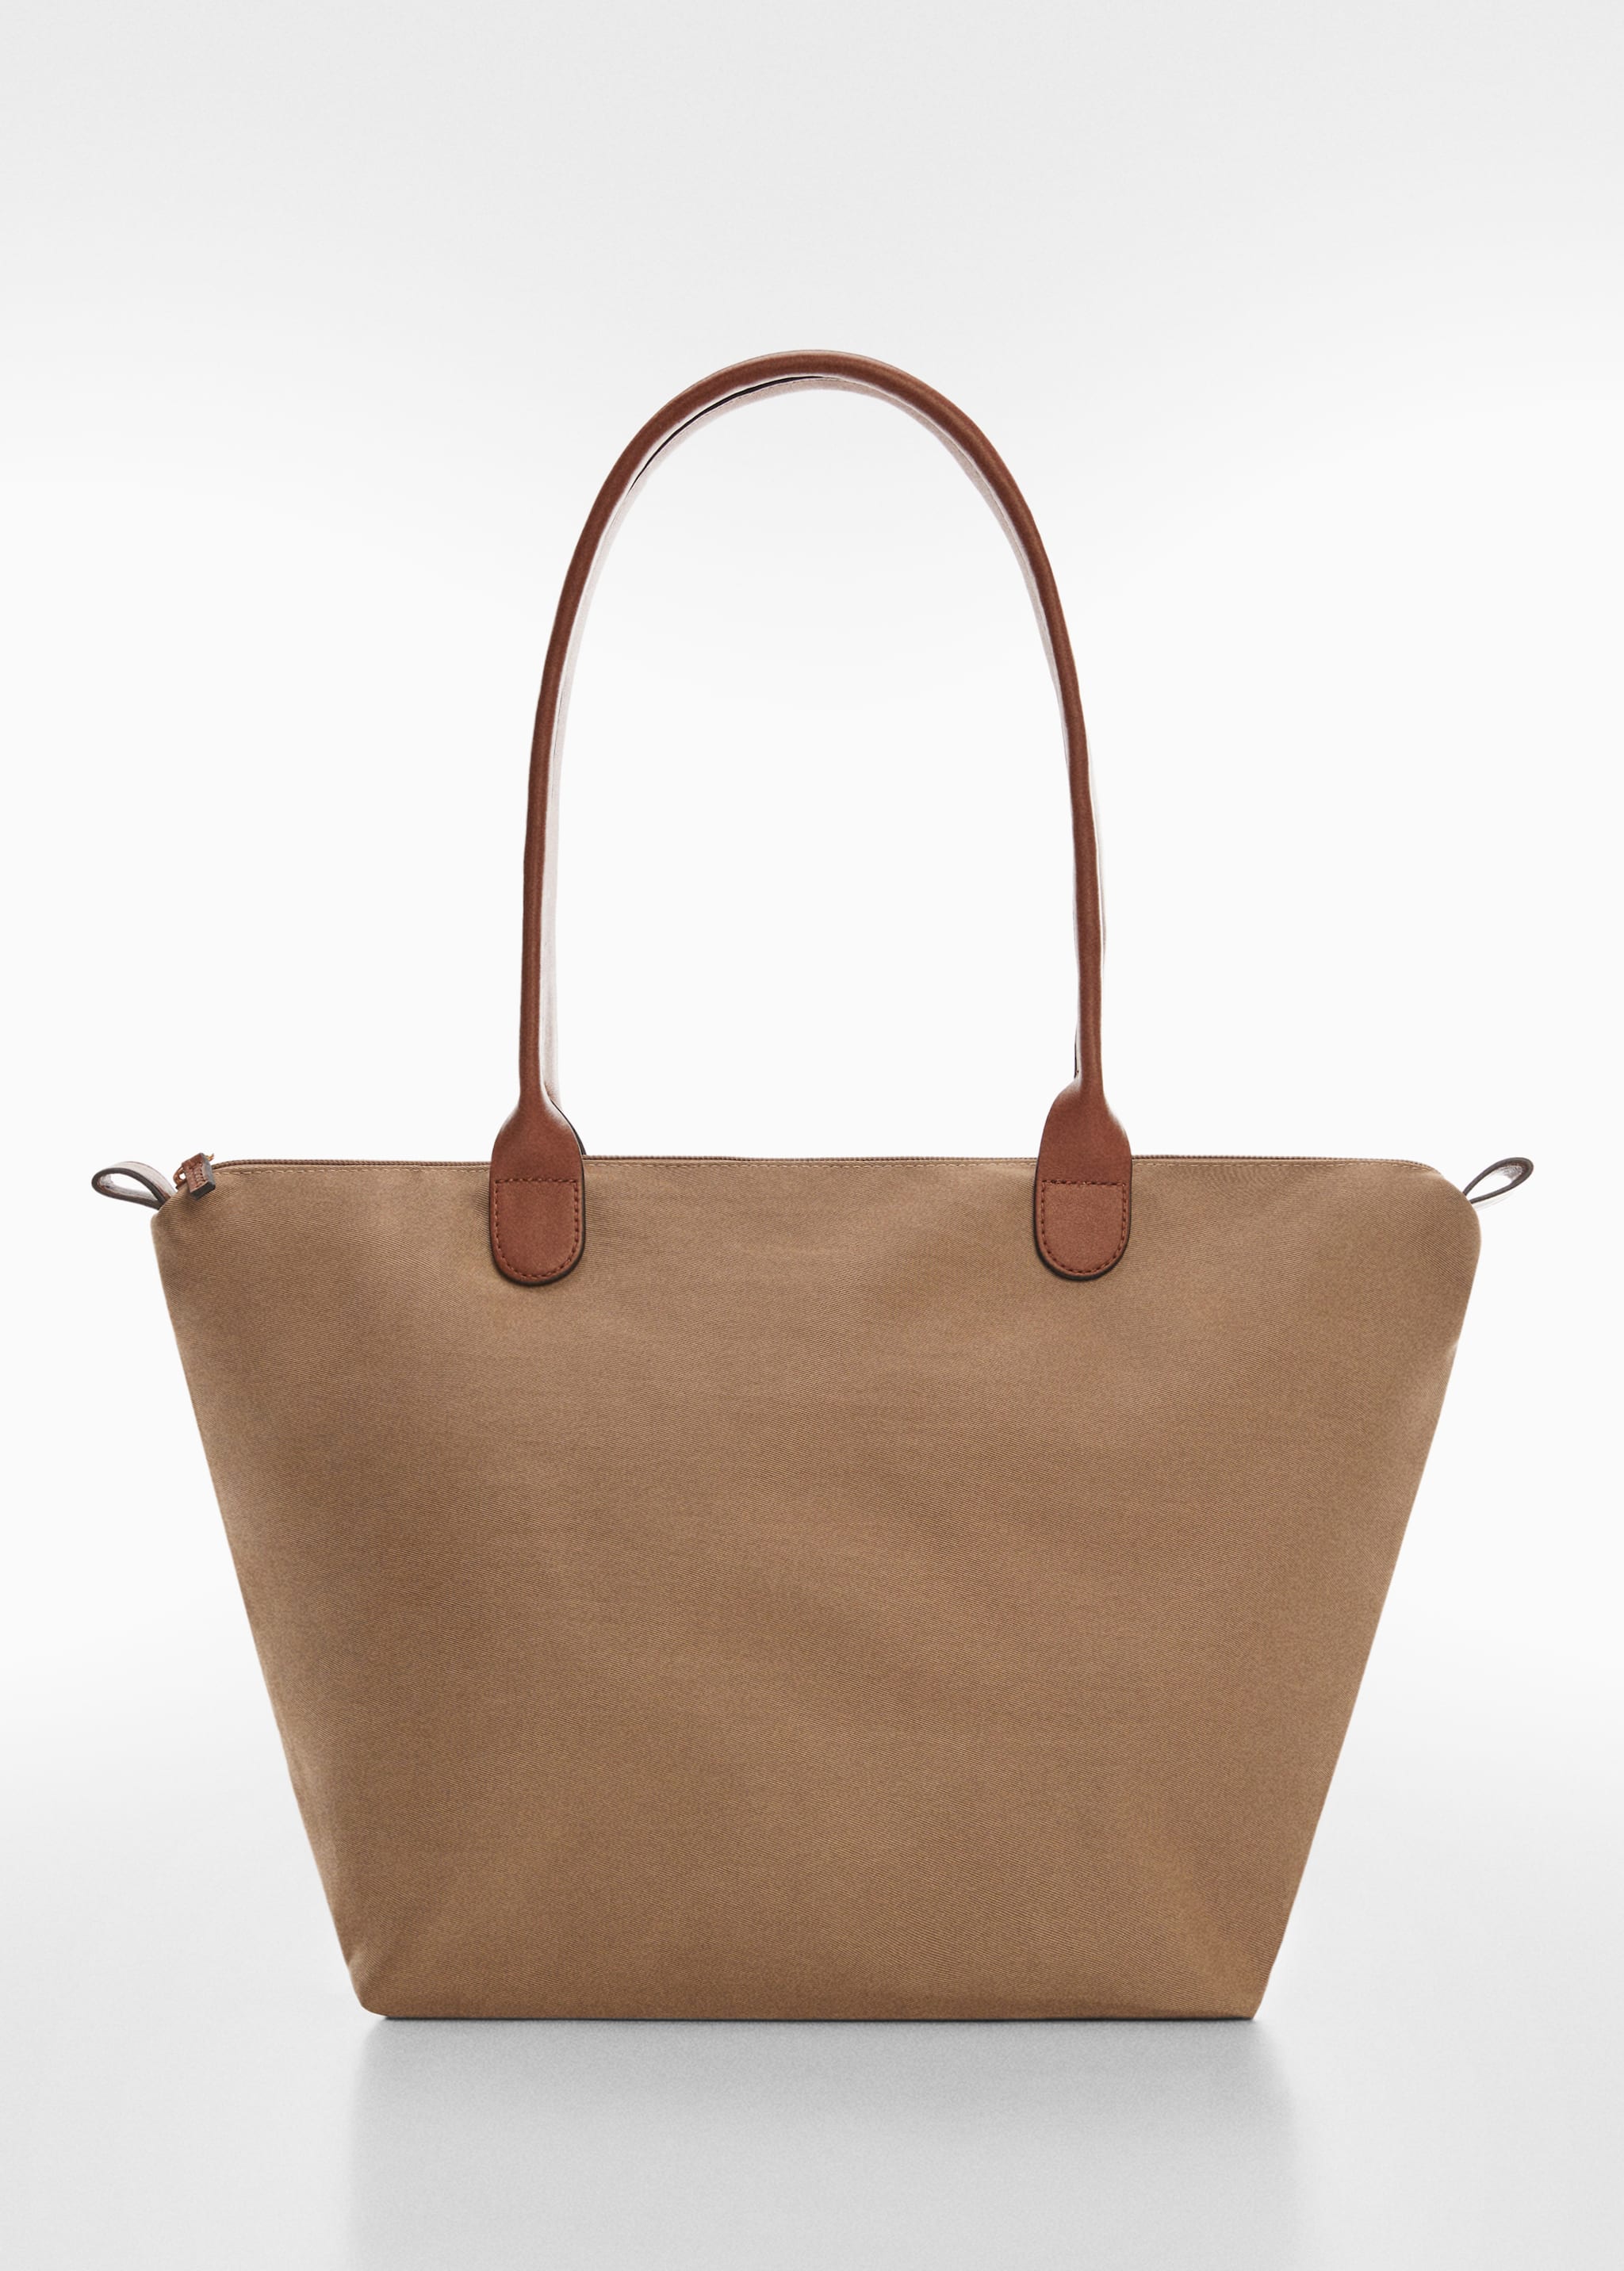 Shopper bag - Article without model